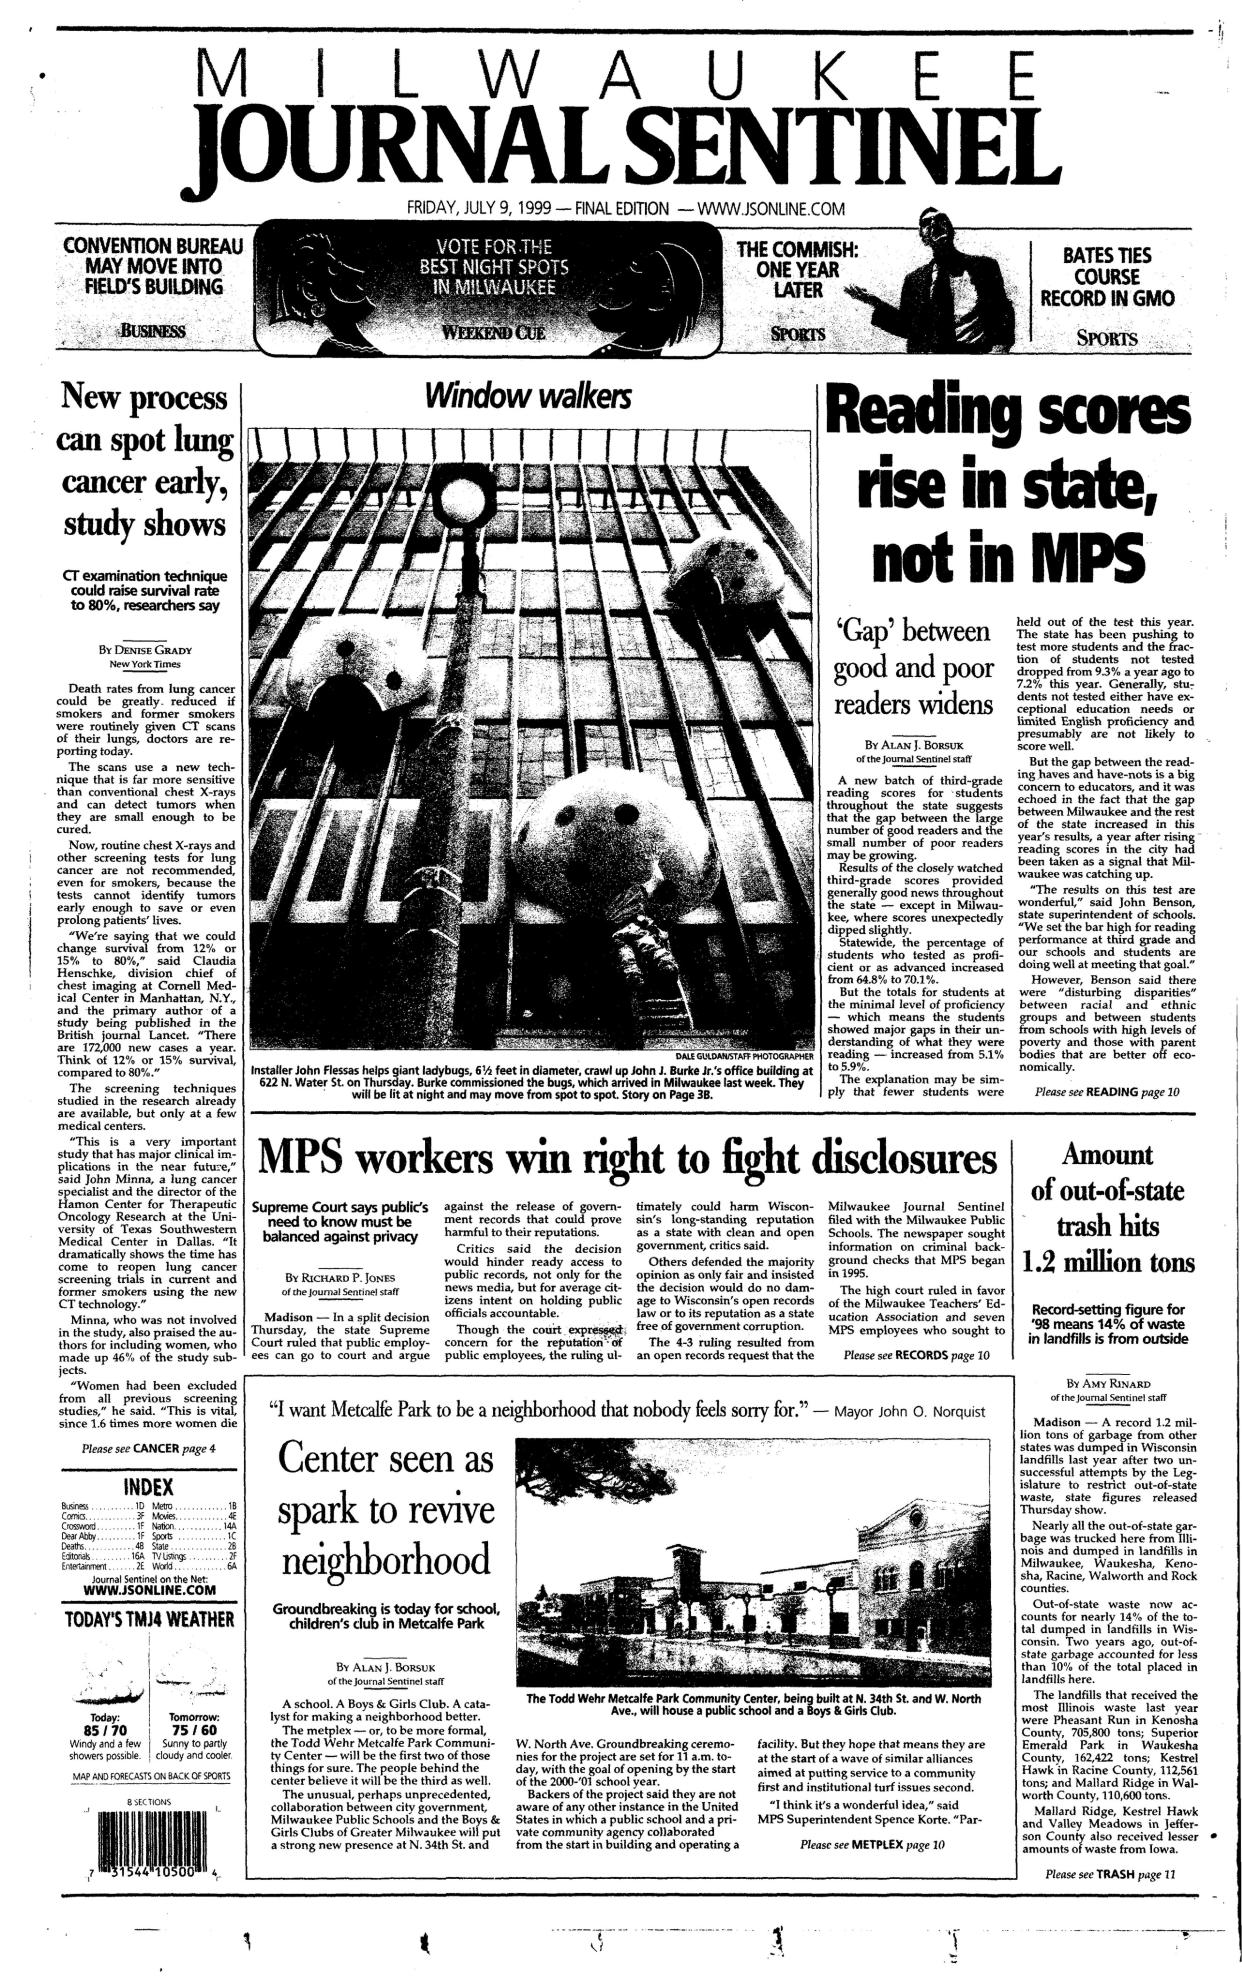 The frontpage of the Milwaukee Journal Sentinel in July 1999 that showed the ladybugs being put up on the Milwaukee Building.